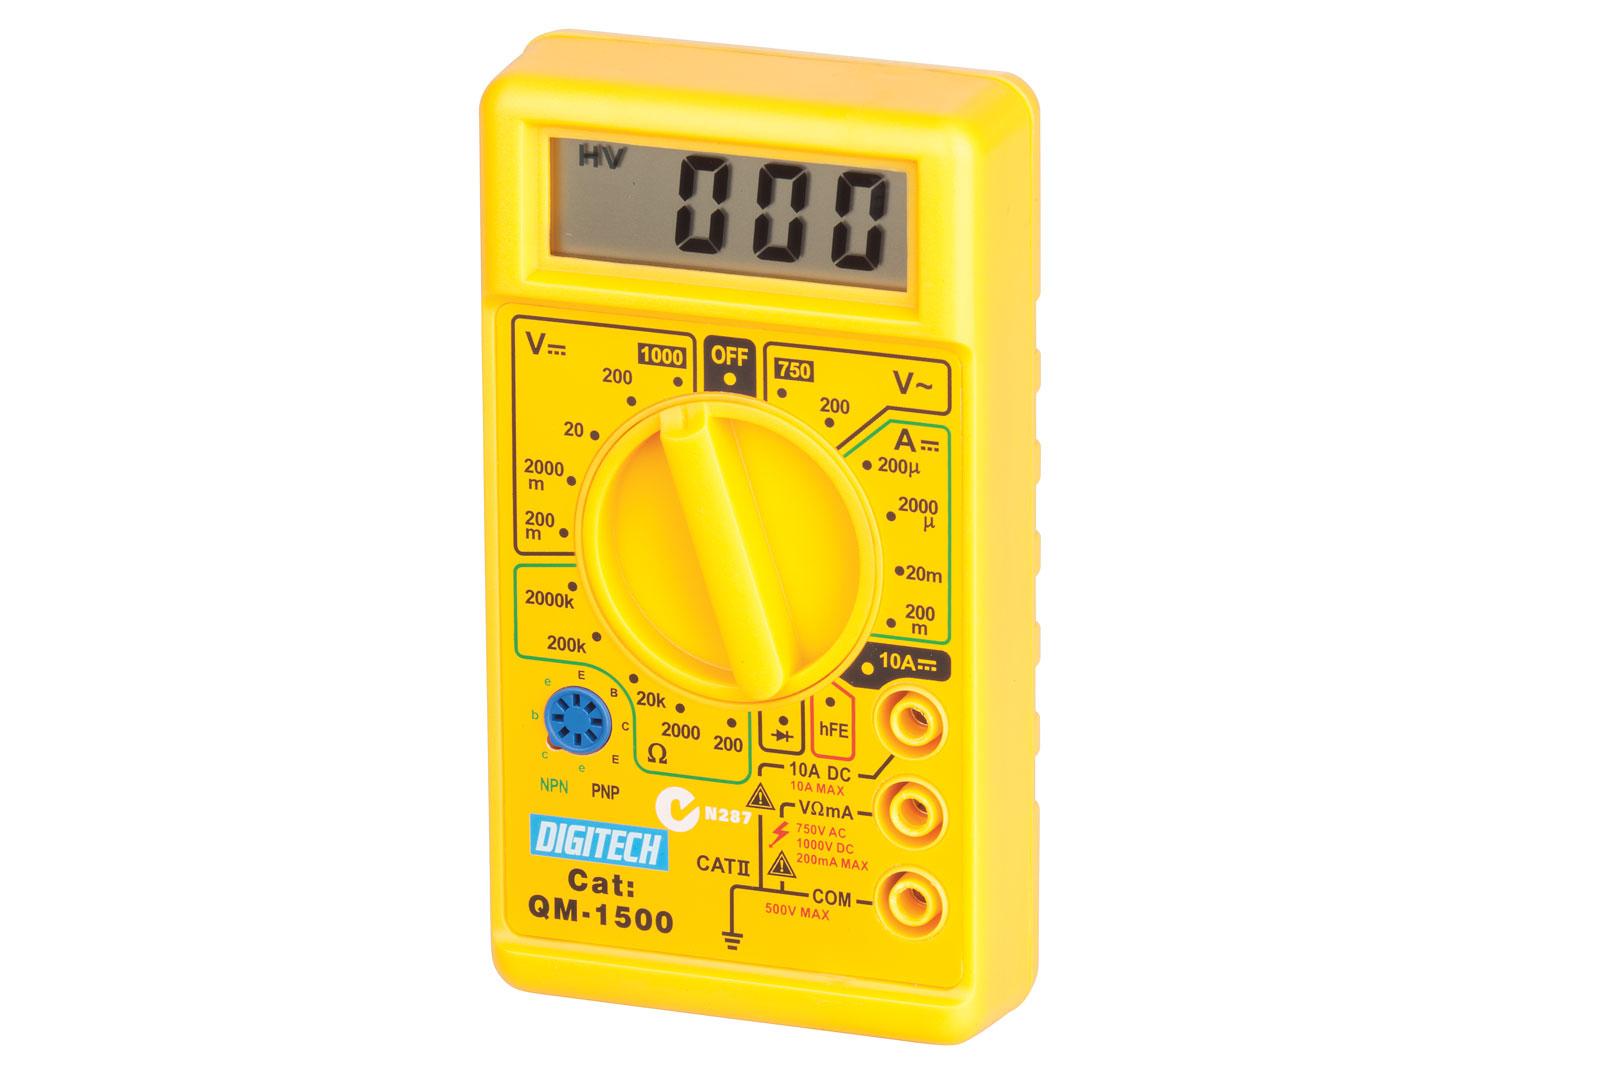 The QM1500 multimeter from Jaycar